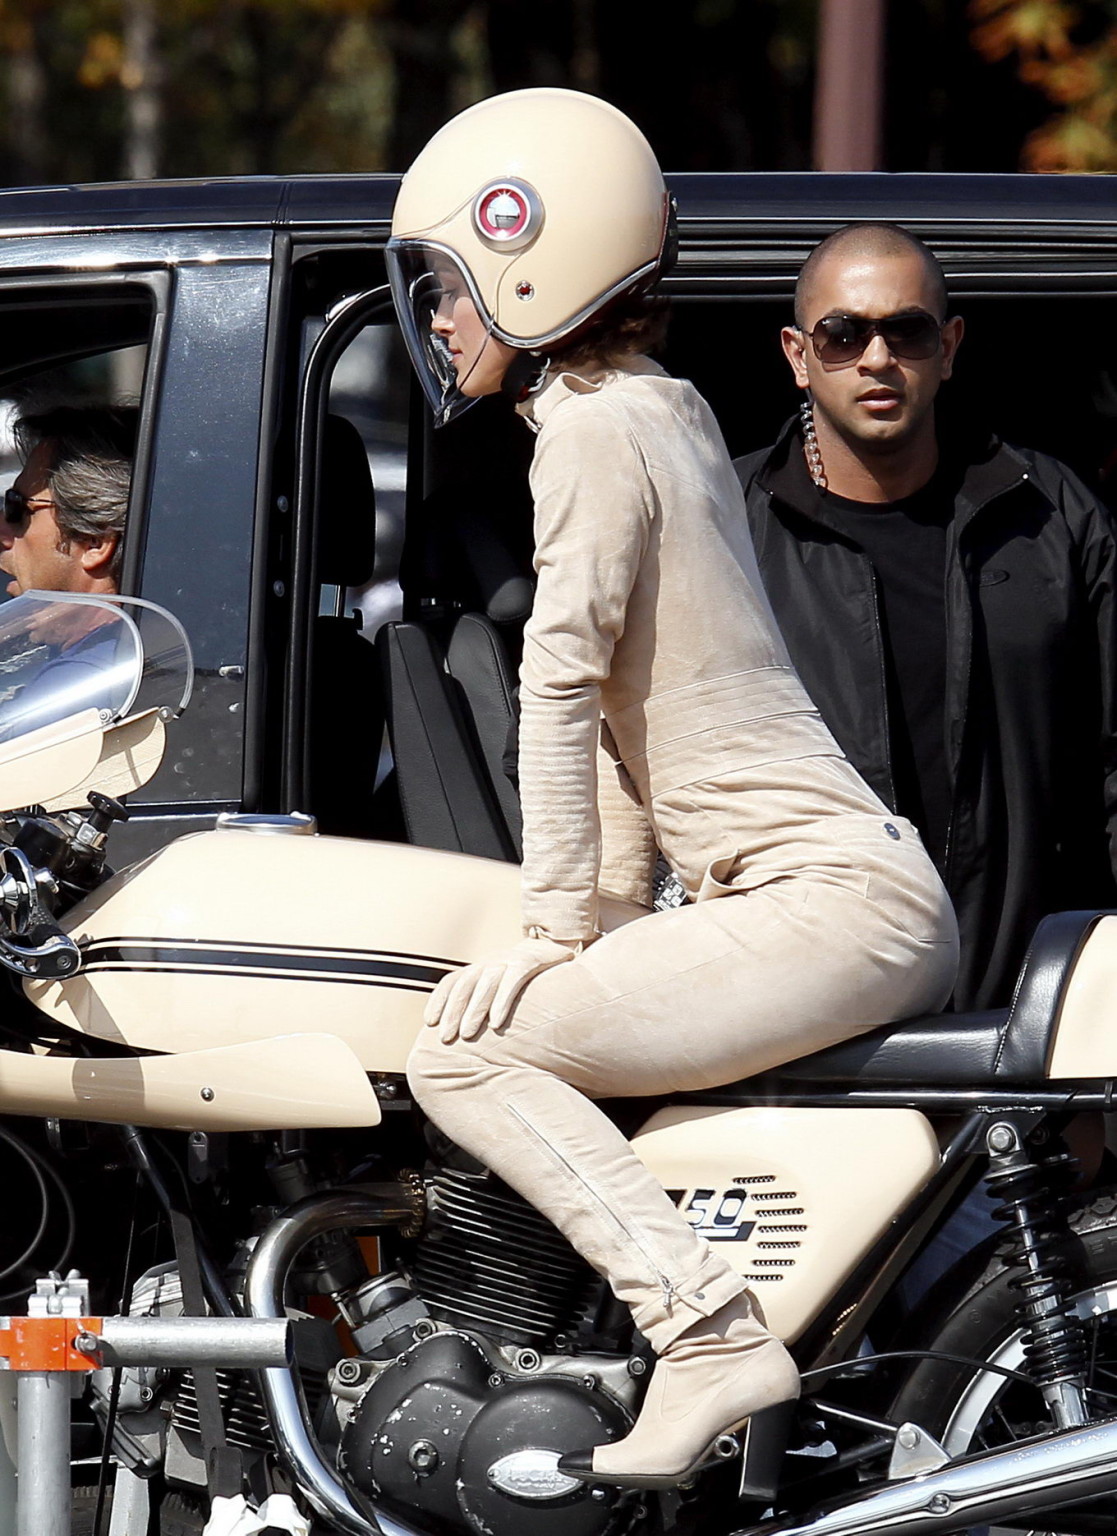 Keira Knightley in tight retro motorcycle suit shooting a commercial in Paris #75334673